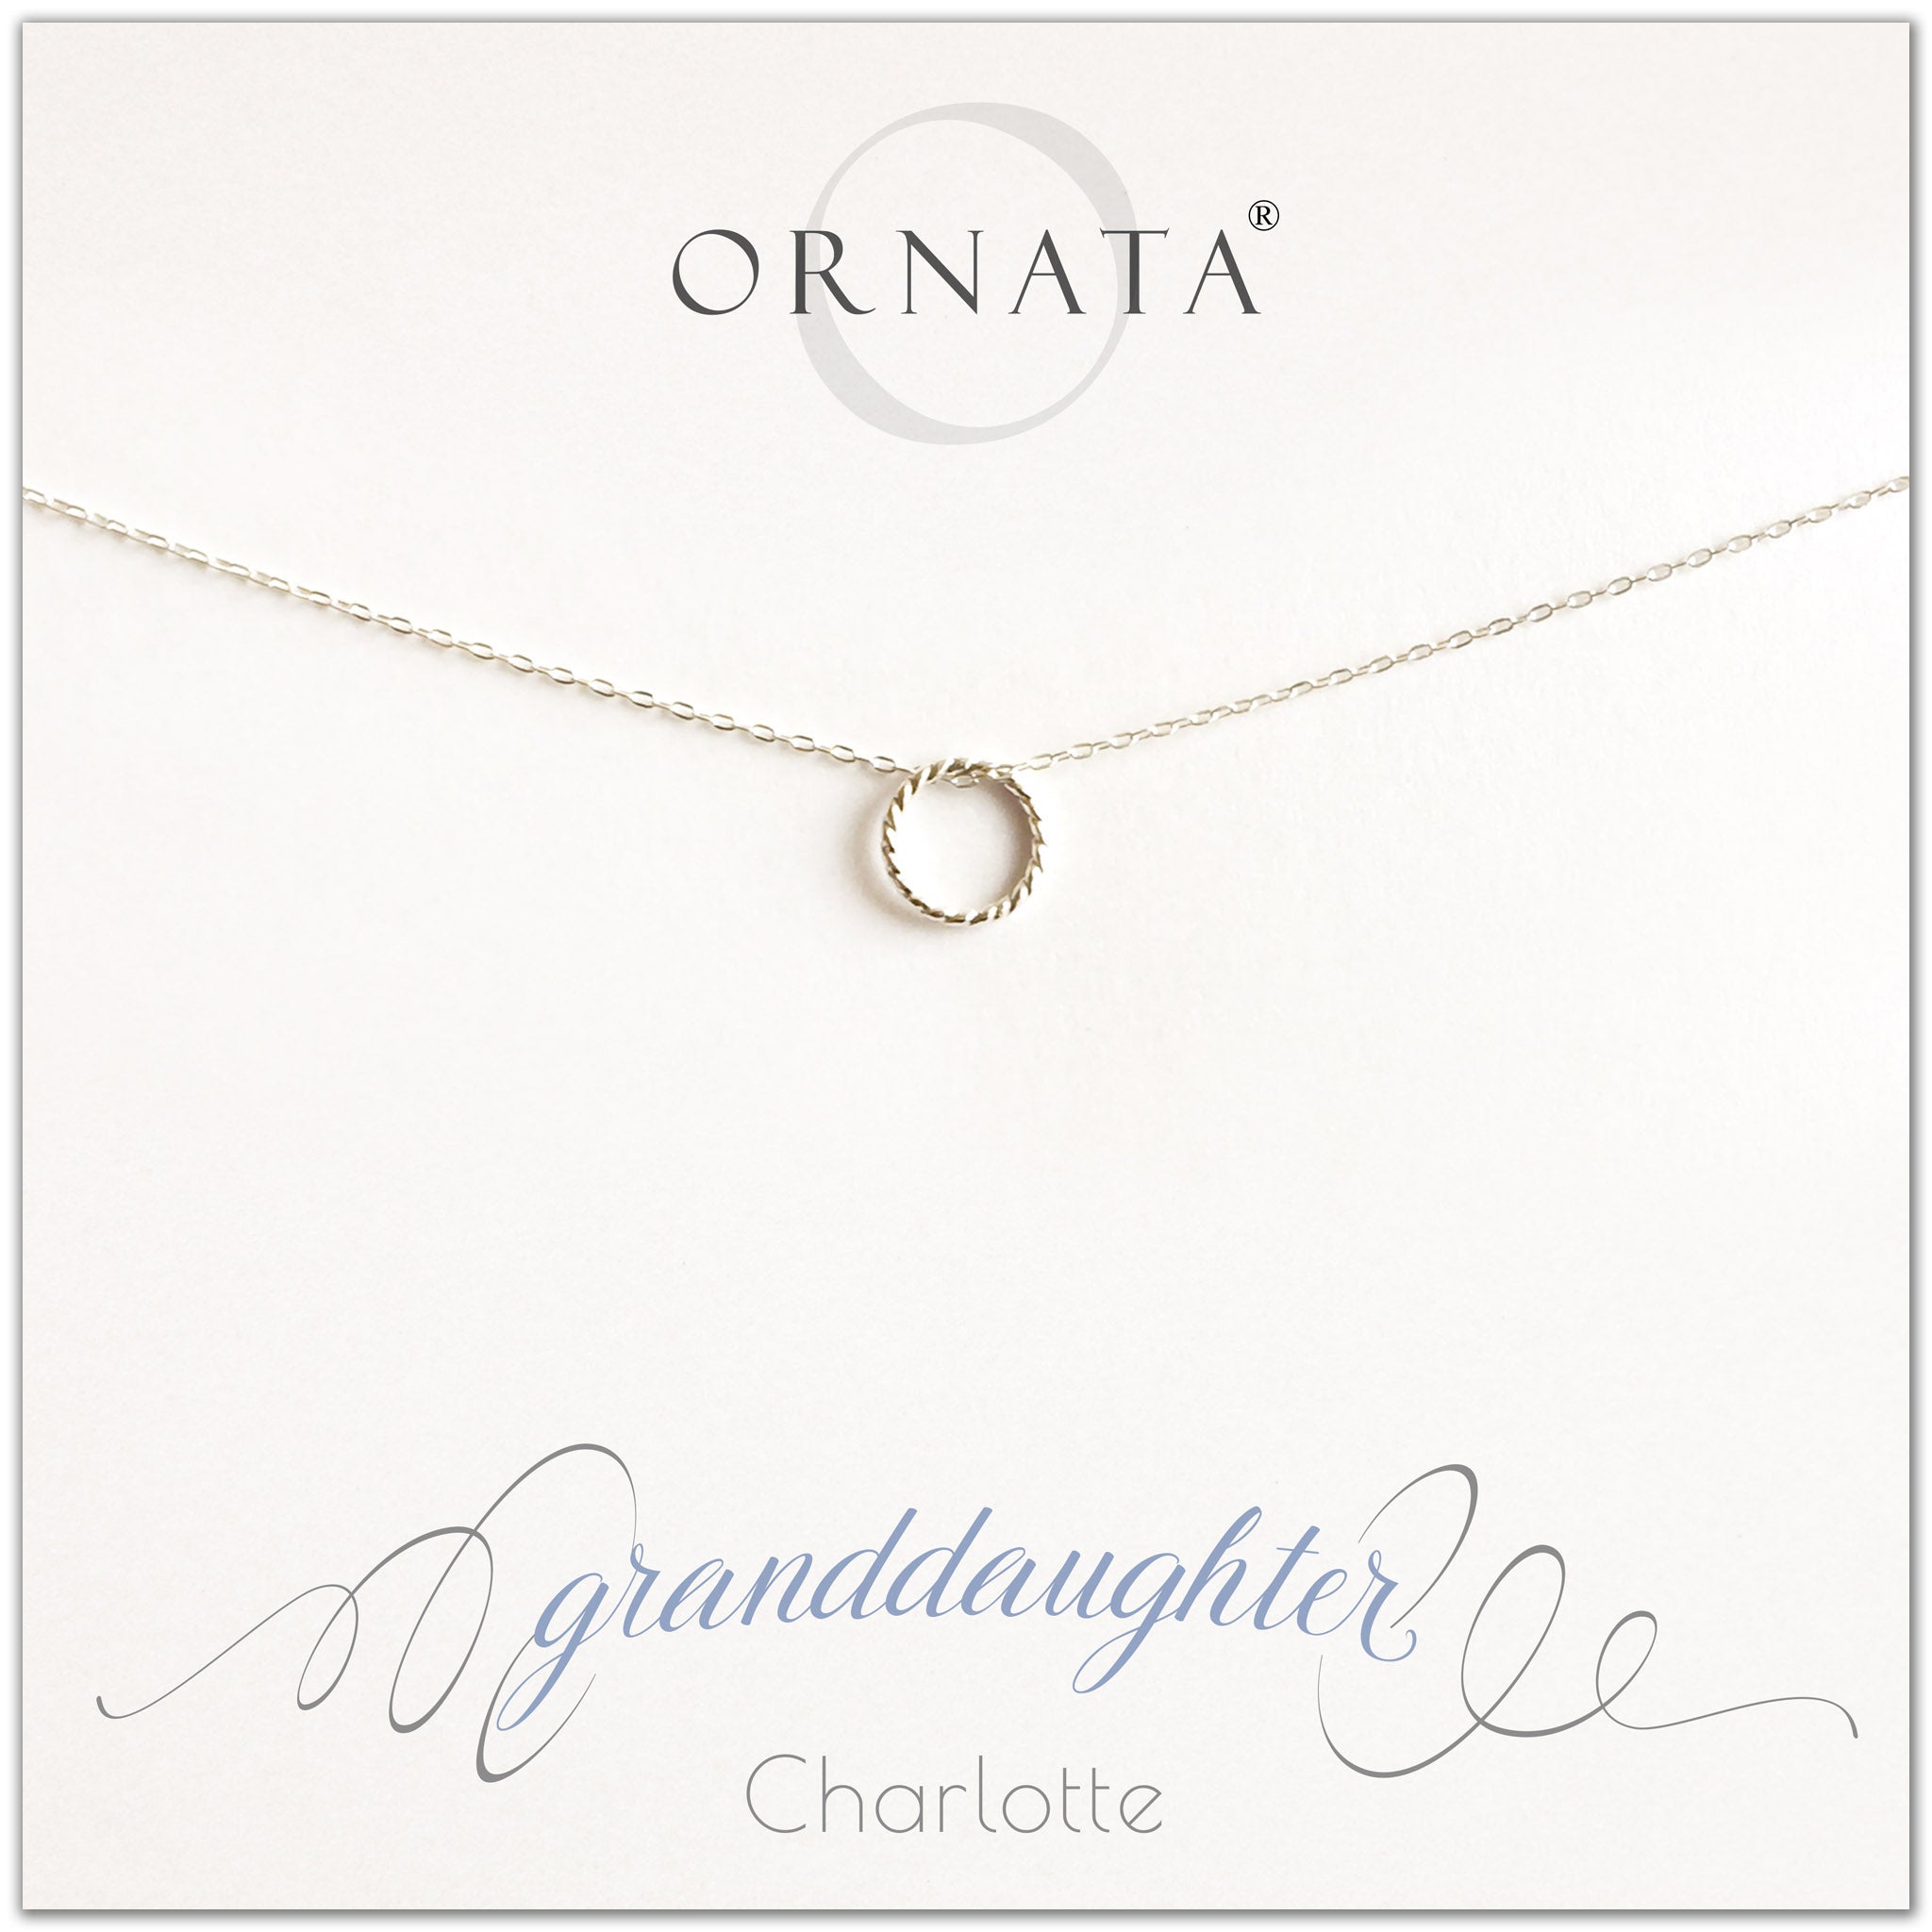 Granddaughter necklace - personalized silver necklaces. Our sterling silver custom jewelry is a perfect gift for granddaughter. Part of our Generations Jewelry collection. Also a good gift for Mother’s Day.